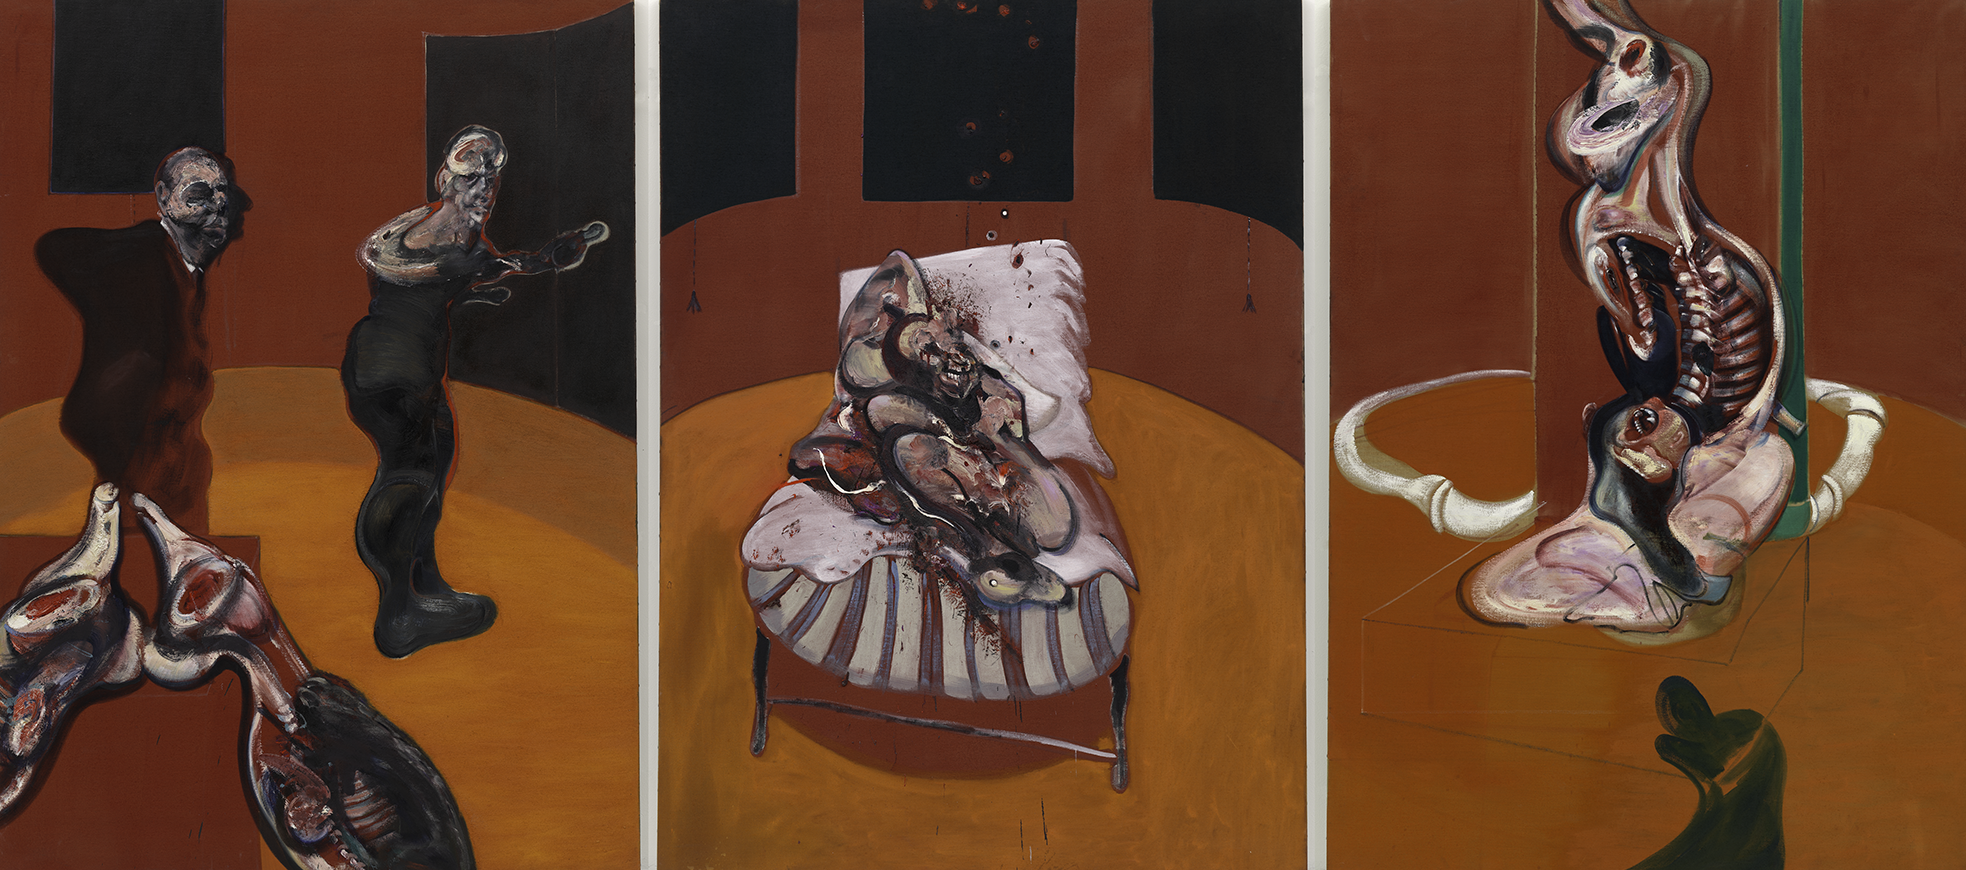 Francis Bacon, Three Studies for a Crucifixion (1944). Courtesy of Guggenheim Museum Bilbao.